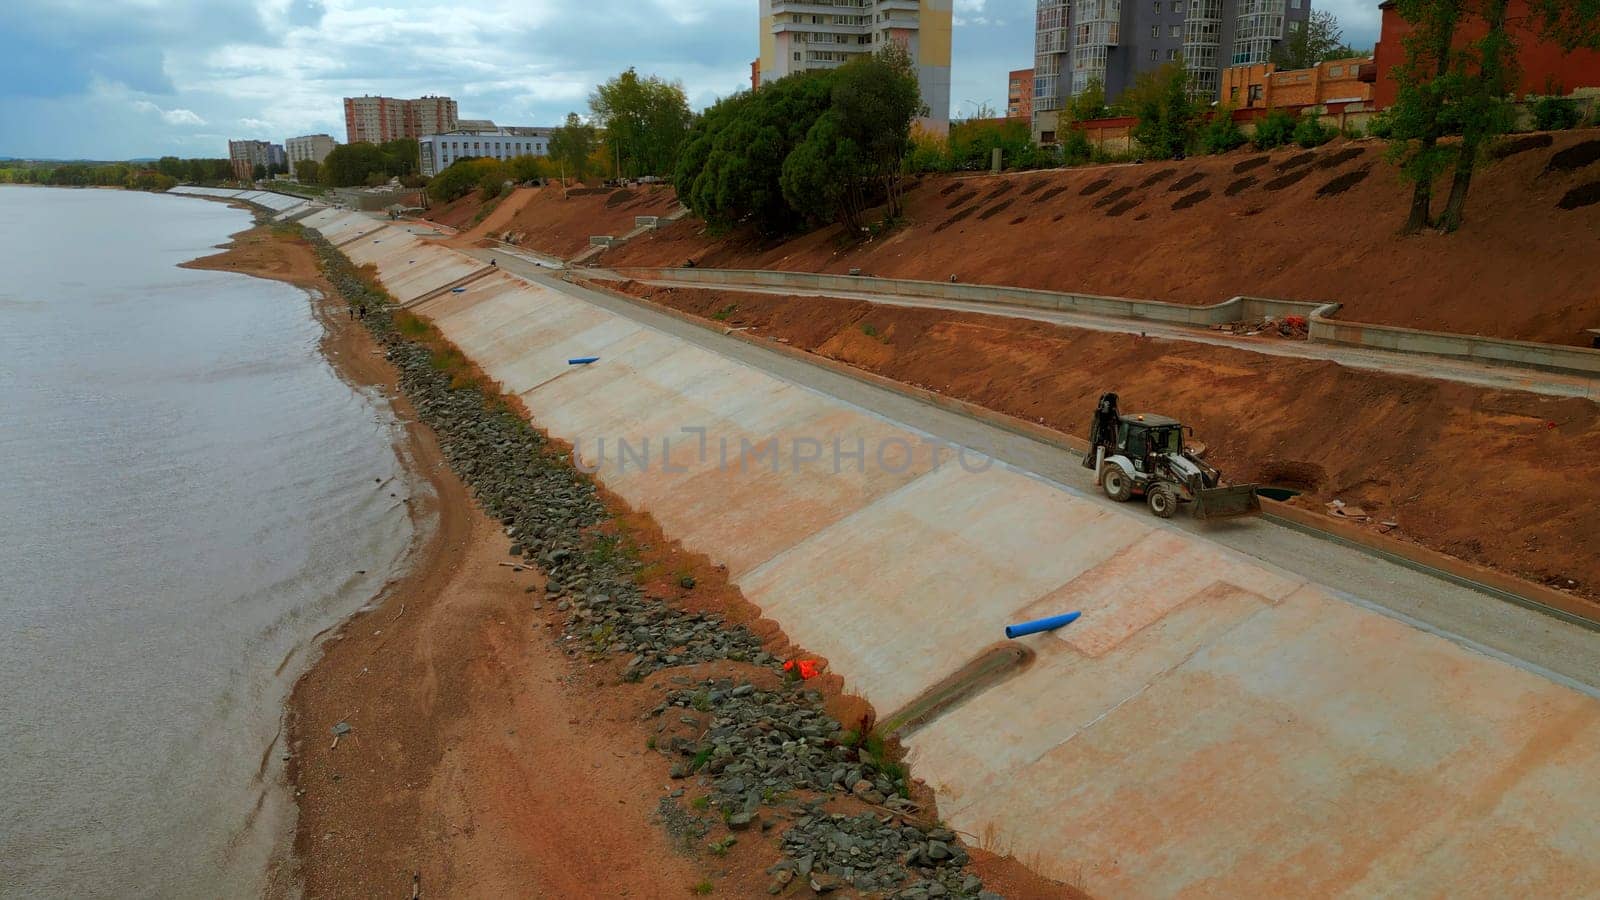 Construction and strengthening of a new safety embankment along the river. Clip. Aerial view ov the improving city area